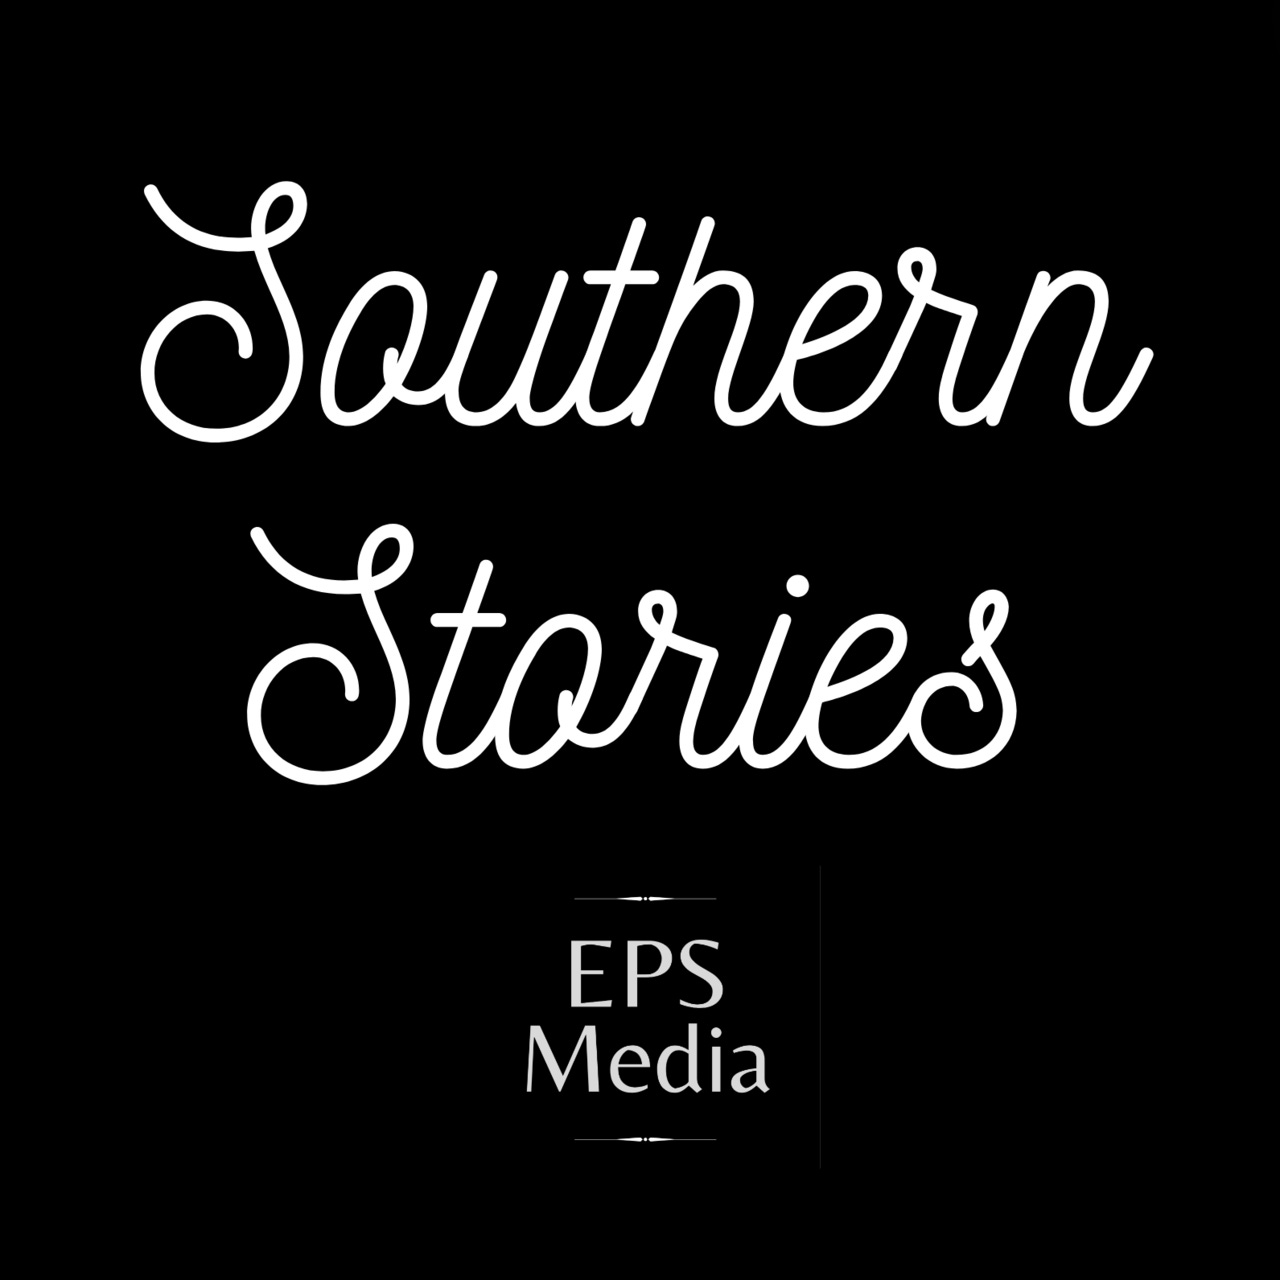 Southern Stories by EPS Media